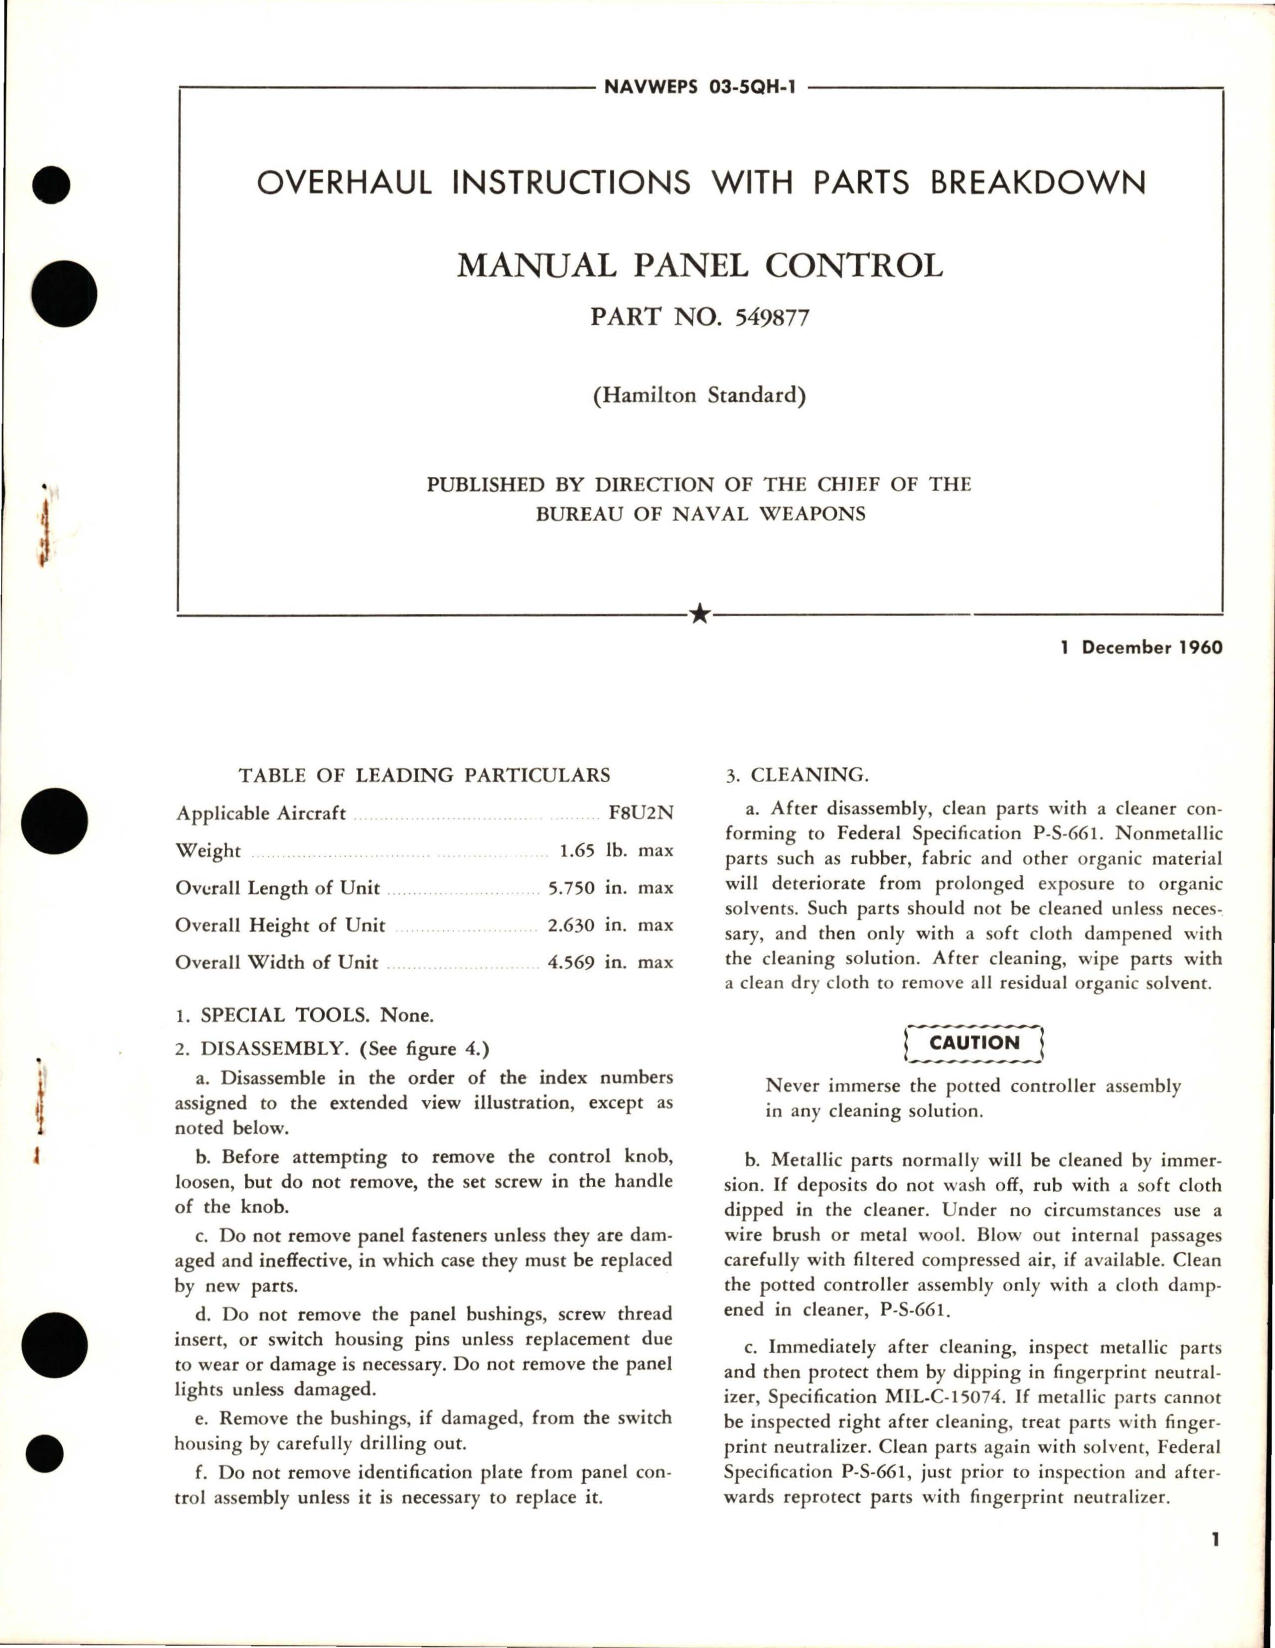 Sample page 1 from AirCorps Library document: Overhaul Instructions with Parts Breakdown for Manual Panel Control - Part 549877